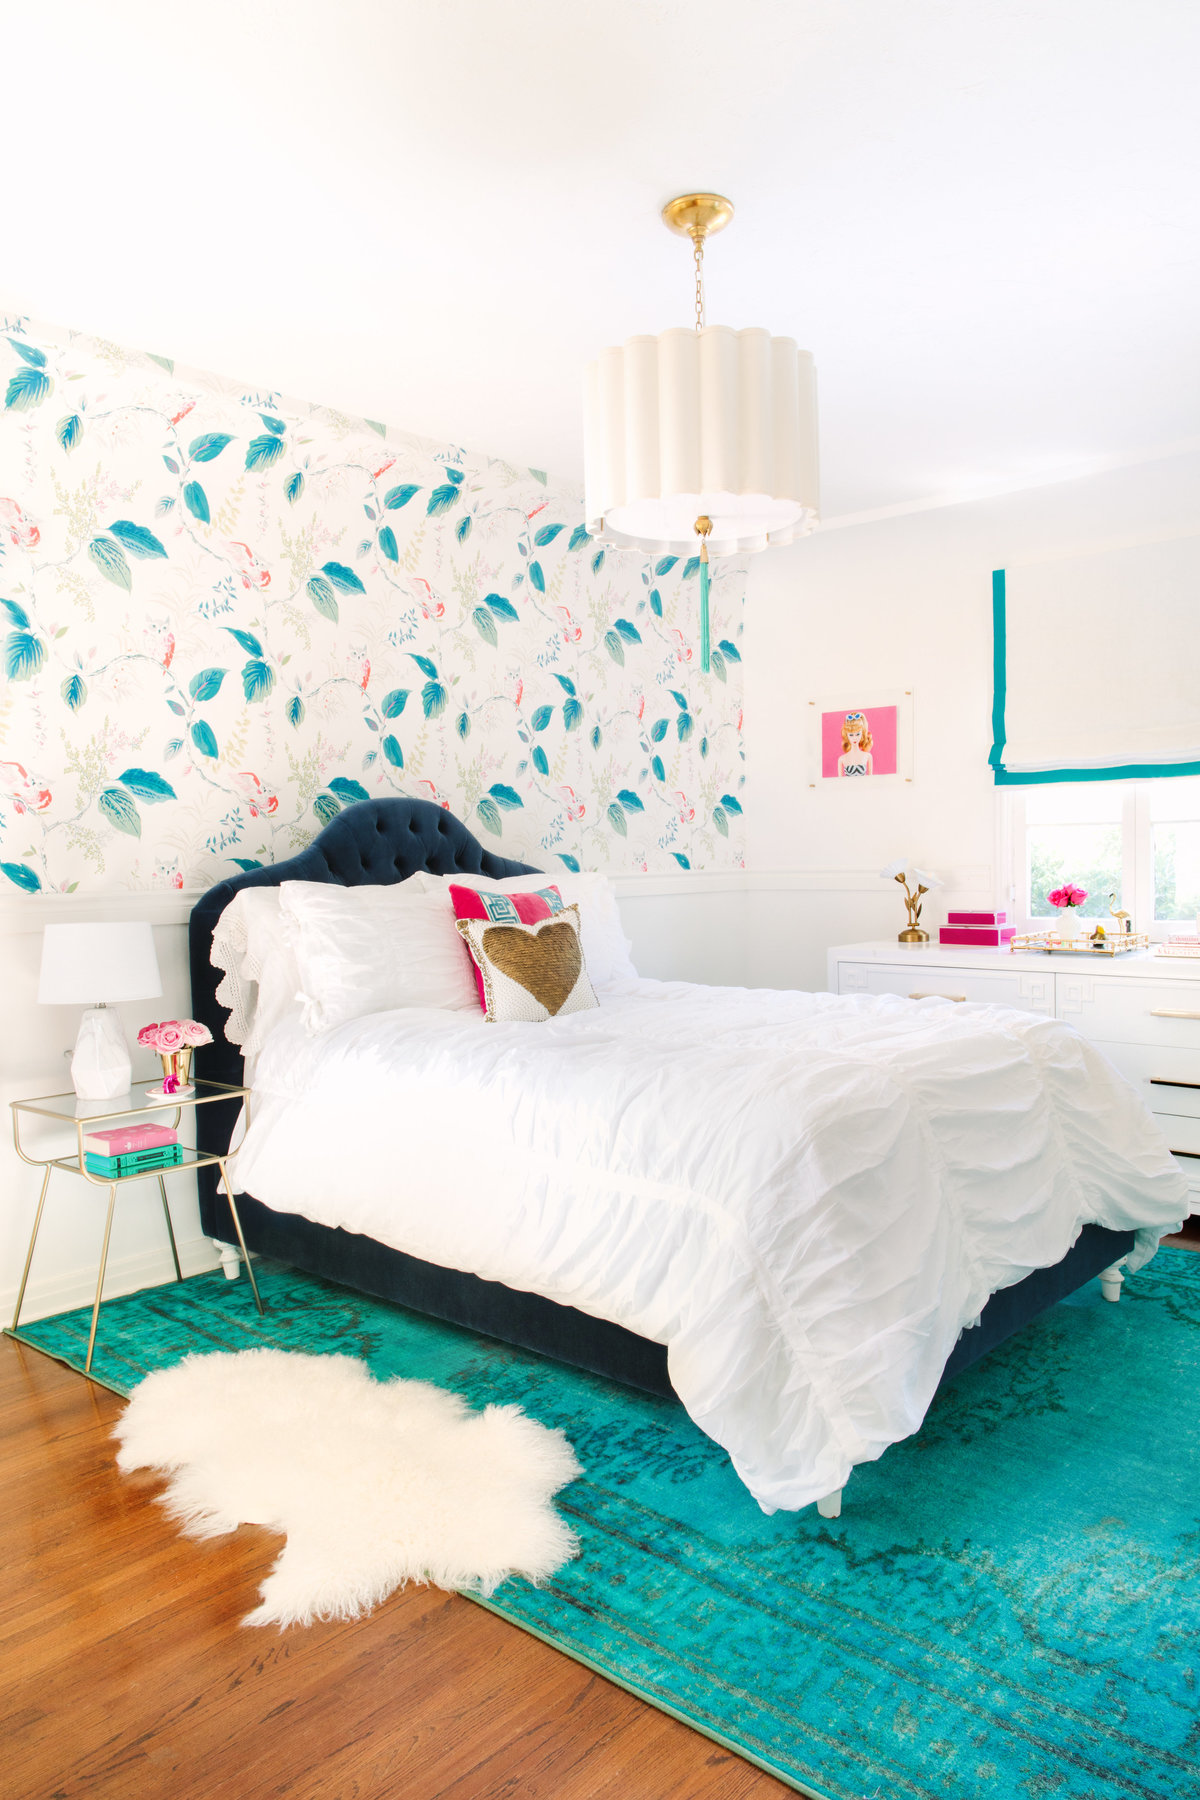 Bedroom with Kate Spade Owlish wallpaper, navy velvet bed, and teal rug